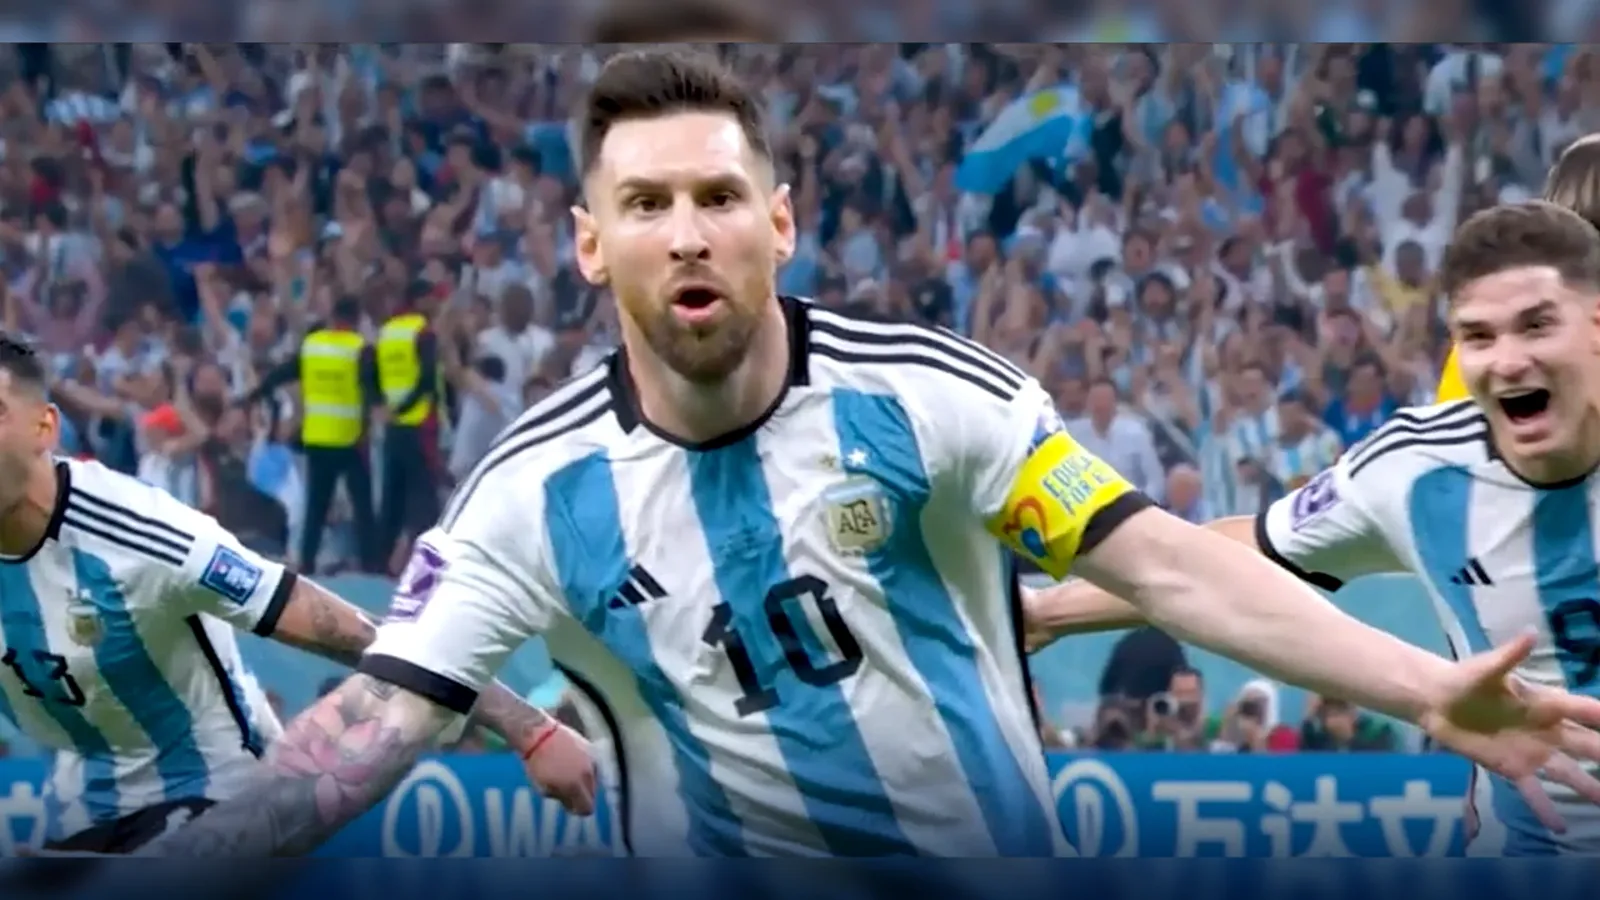 Lionel Messi brings glory to Argentina in the 2022 FIFA World Cup | FOX Soccer